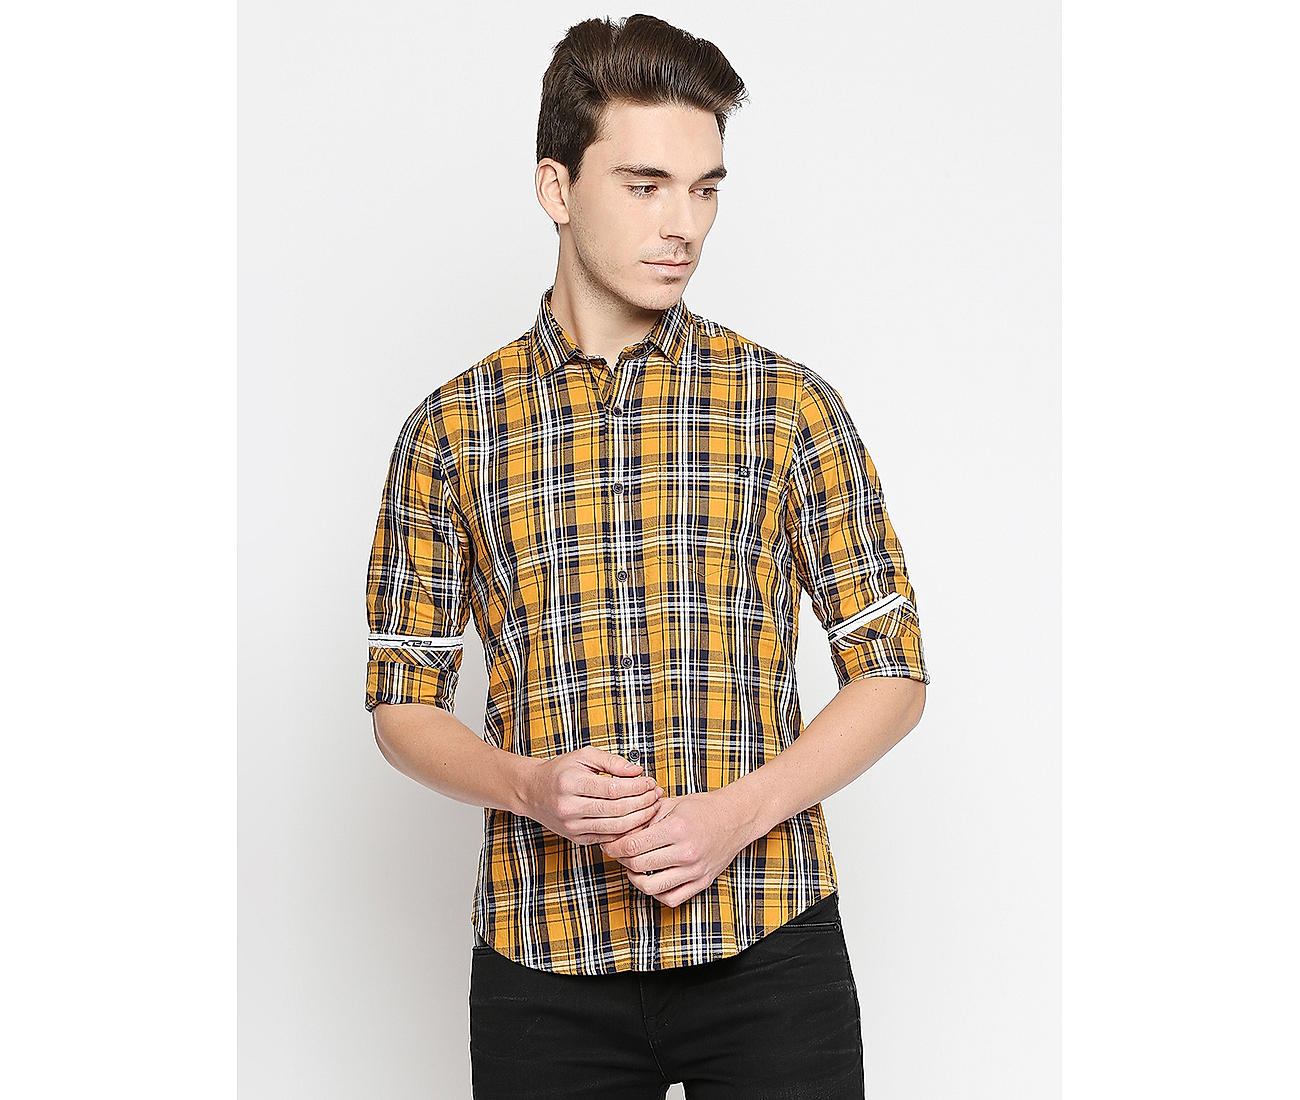 Buy Slim Fit Check Yellow Shirts for Men Online at Killer Jeans